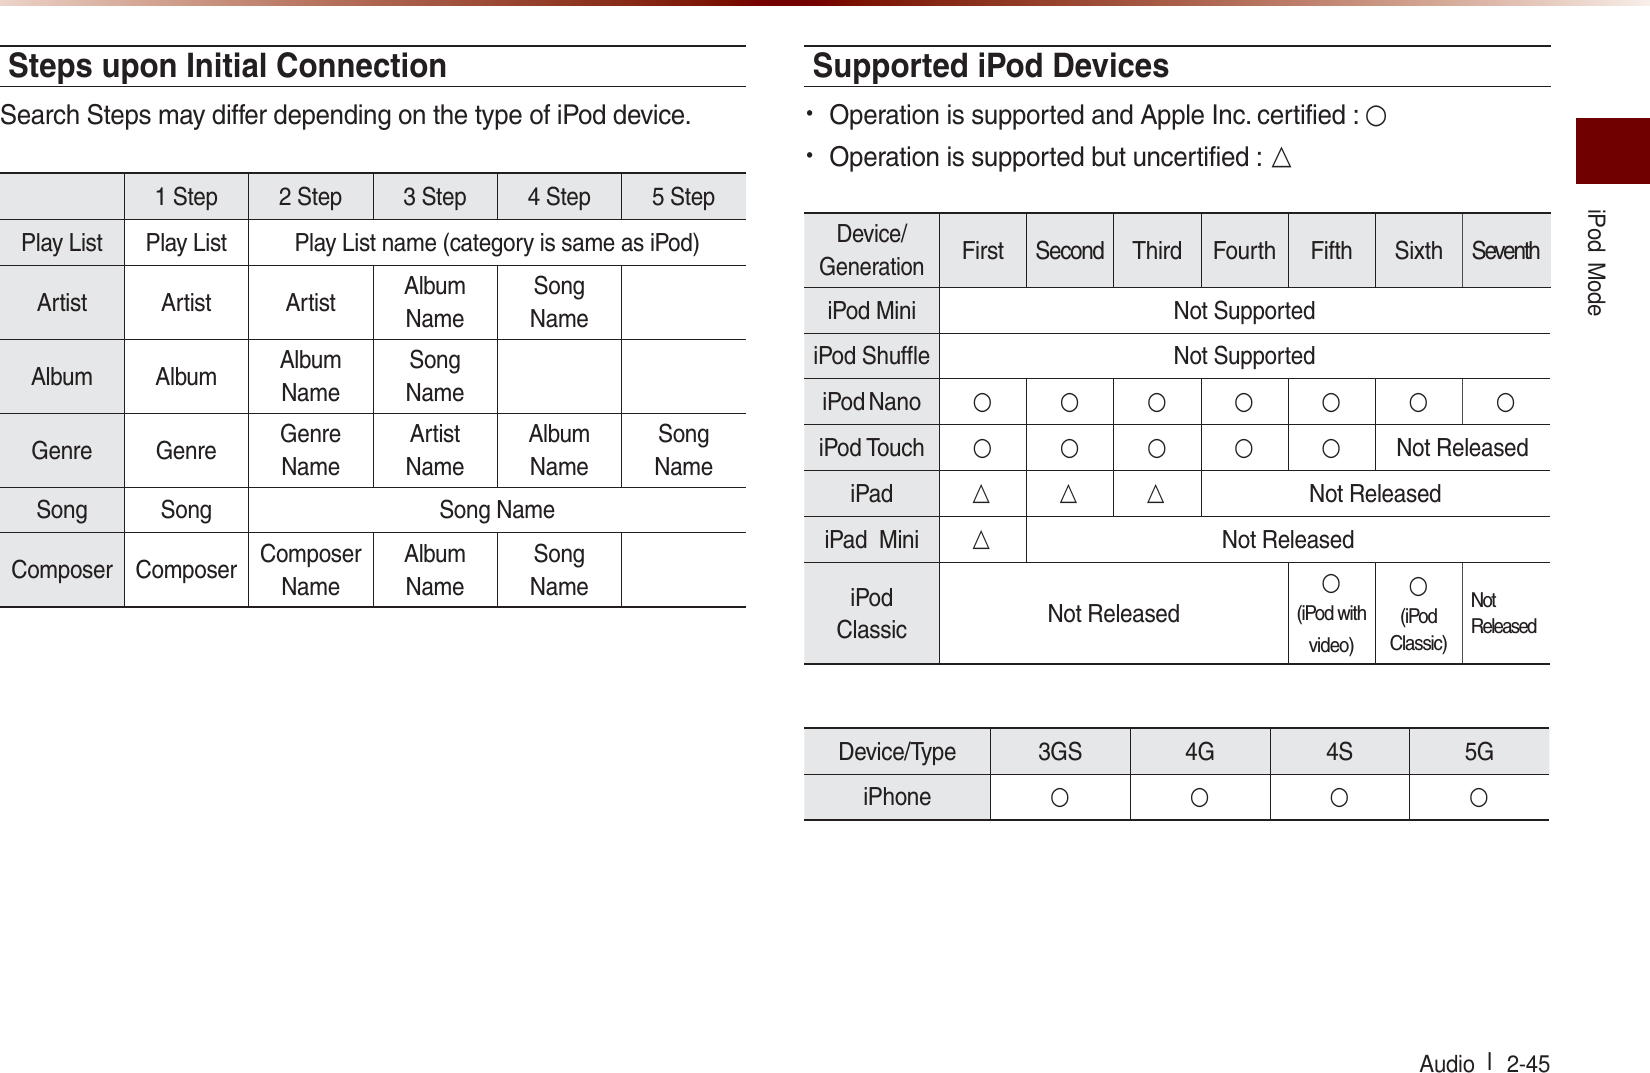 iPod  Mode Audio l  2-45 Steps upon Initial ConnectionSearch Steps may differ depending on the type of iPod device.Supported iPod Devices• Operation is supported and Apple Inc. certified : ○• Operation is supported but uncertified : △iPod Touch 1 Step 2 Step 3 Step 4 Step 5 StepPlay List Play List Play List name (category is same as iPod)Artist Artist Artist AlbumNameSong NameAlbum Album AlbumNameSong NameGenre Genre GenreNameArtist  NameAlbum NameSongName Song Song Song NameComposer Composer Composer NameAlbum NameSong NameDevice/GenerationFirst Second Third Fourth Fifth Sixth SeventhiPod Mini  Not SupportediPod Shufﬂ e Not SupportediPod Nano ○○○○○○○iPod Touch  ○○○○○Not ReleasediPad  △△△ Not ReleasediPad  Mini △Not ReleasediPod Classic Not Released○(iPod with video)○(iPod Classic)Not ReleasedDevice/Type 3GS 4G 4S 5GiPhone  ○○○○             